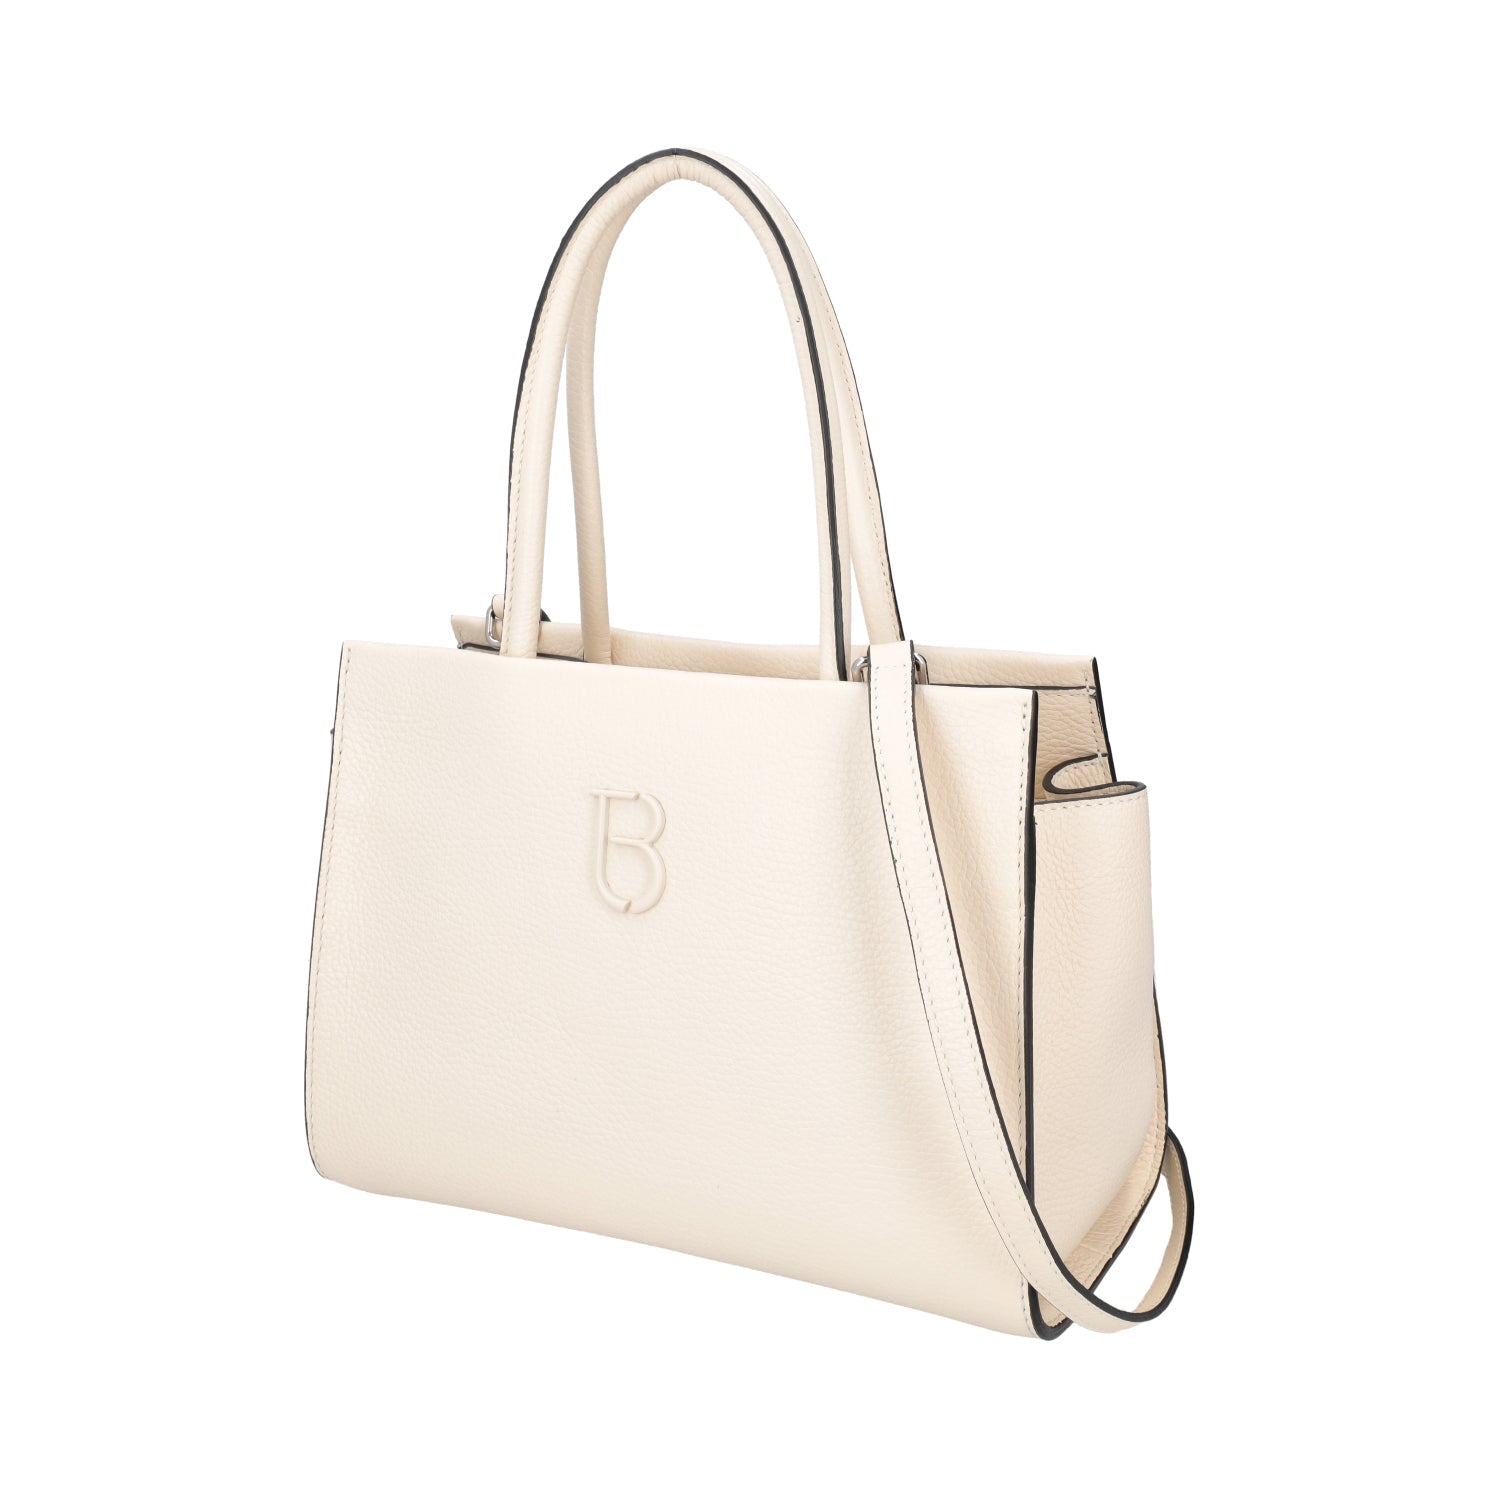 NATURAL NARCISO HAND BAG IN LEATHER